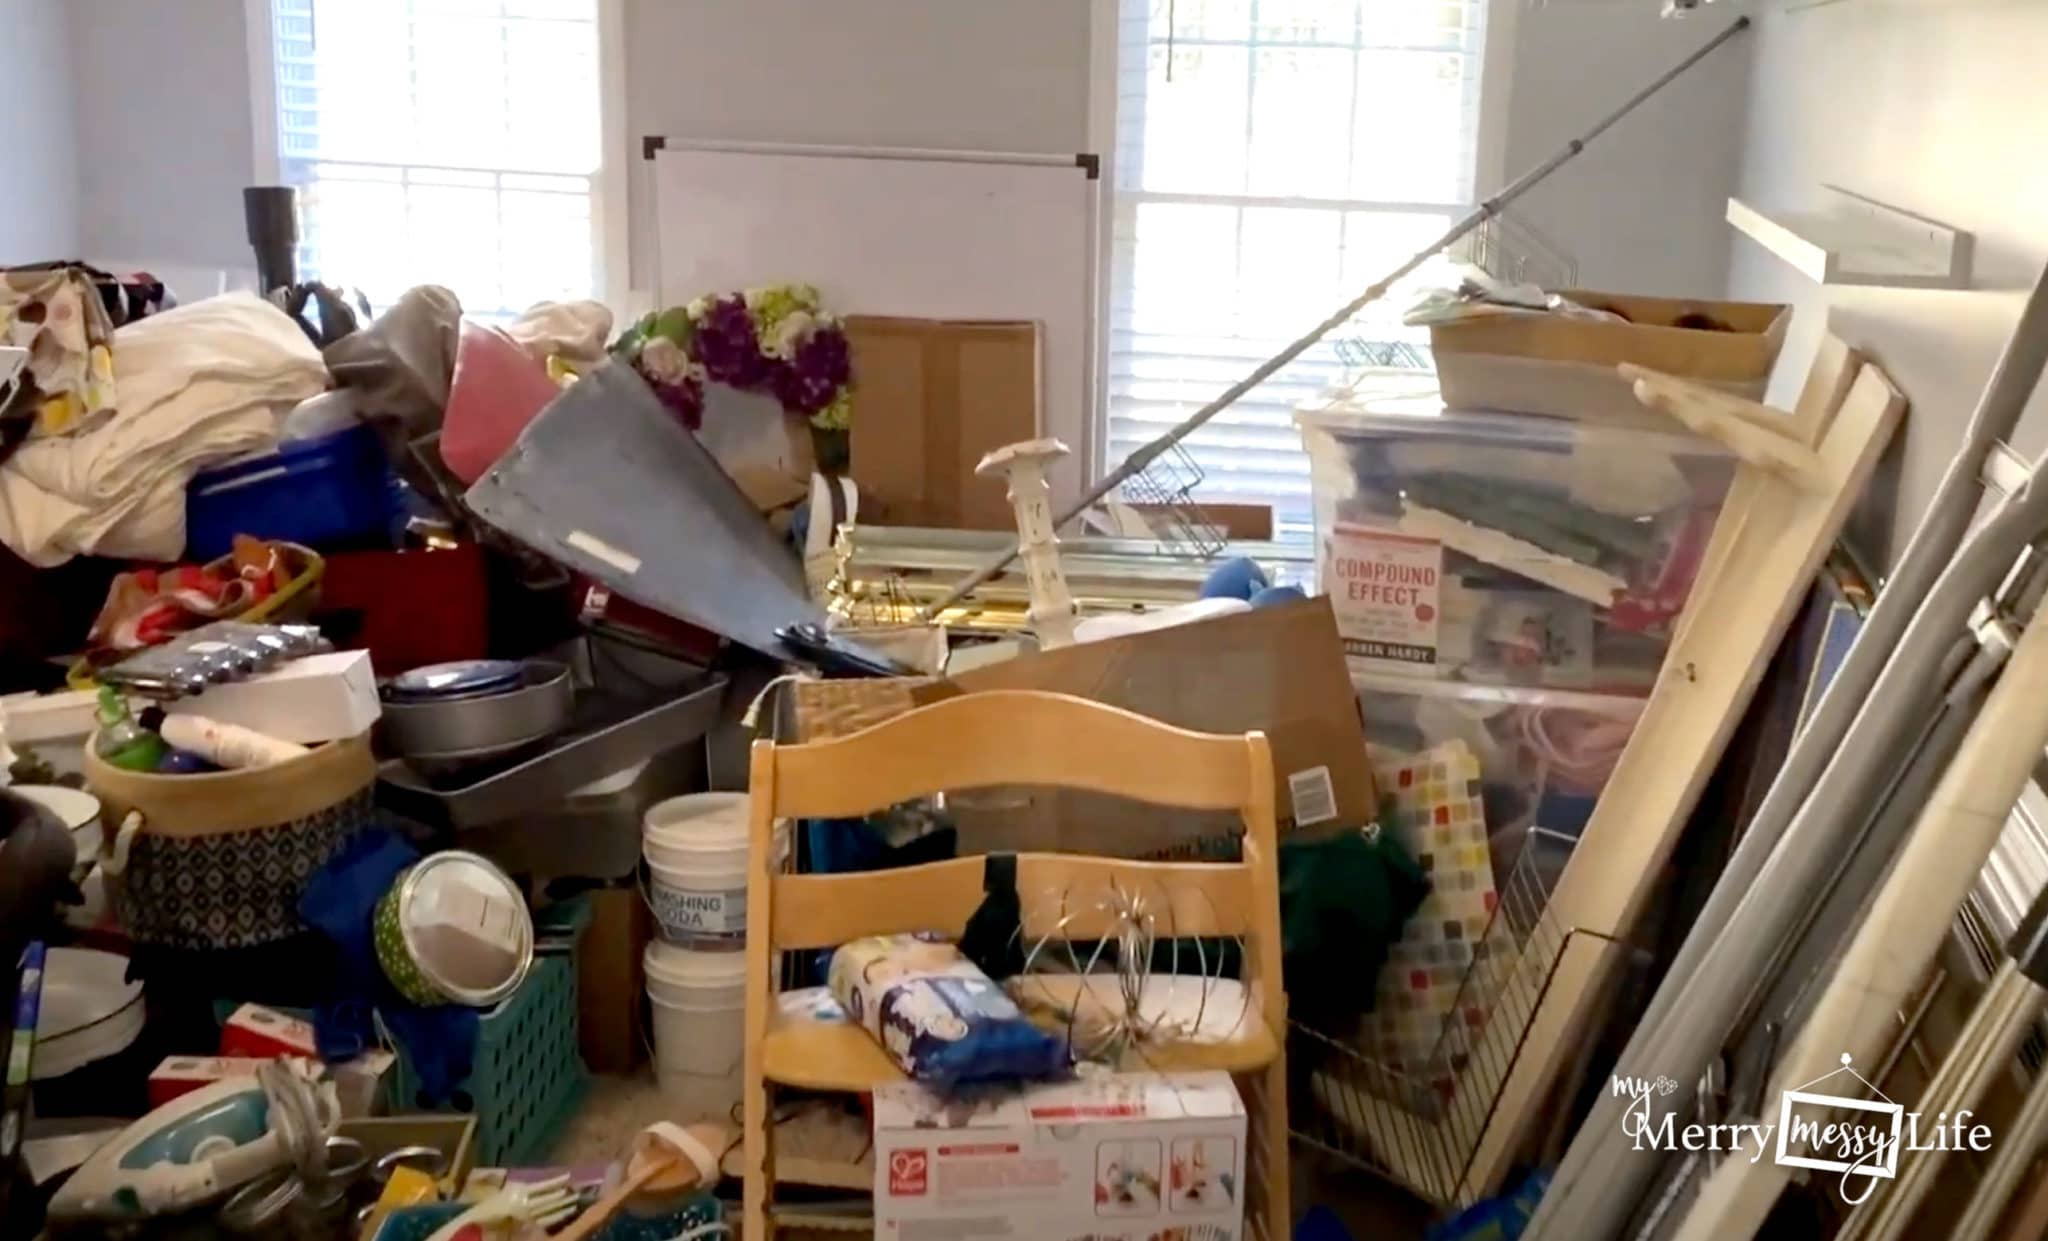 How to Declutter to Move Abroad - empty out a room to fill with your decluttered items. Here is our dining room full of stuff we sold and gave away!